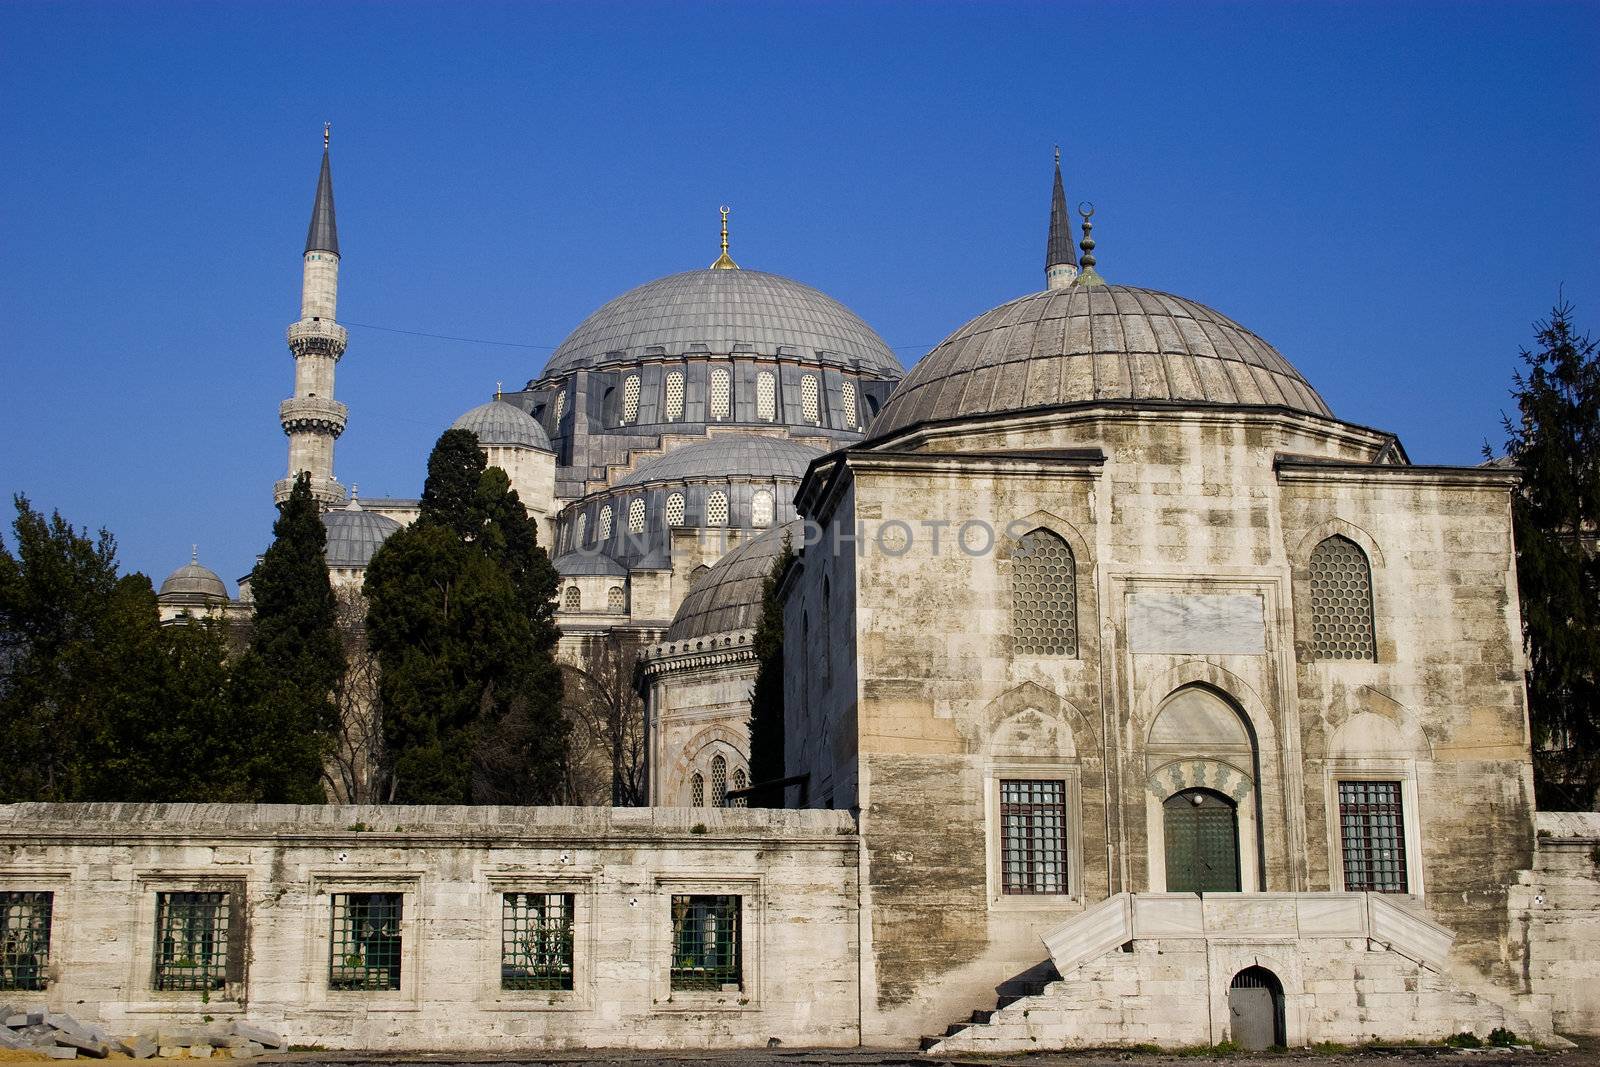 Suleymaniye Mosque in Istanbul, Turkey. It is the second largest mosque in the city.